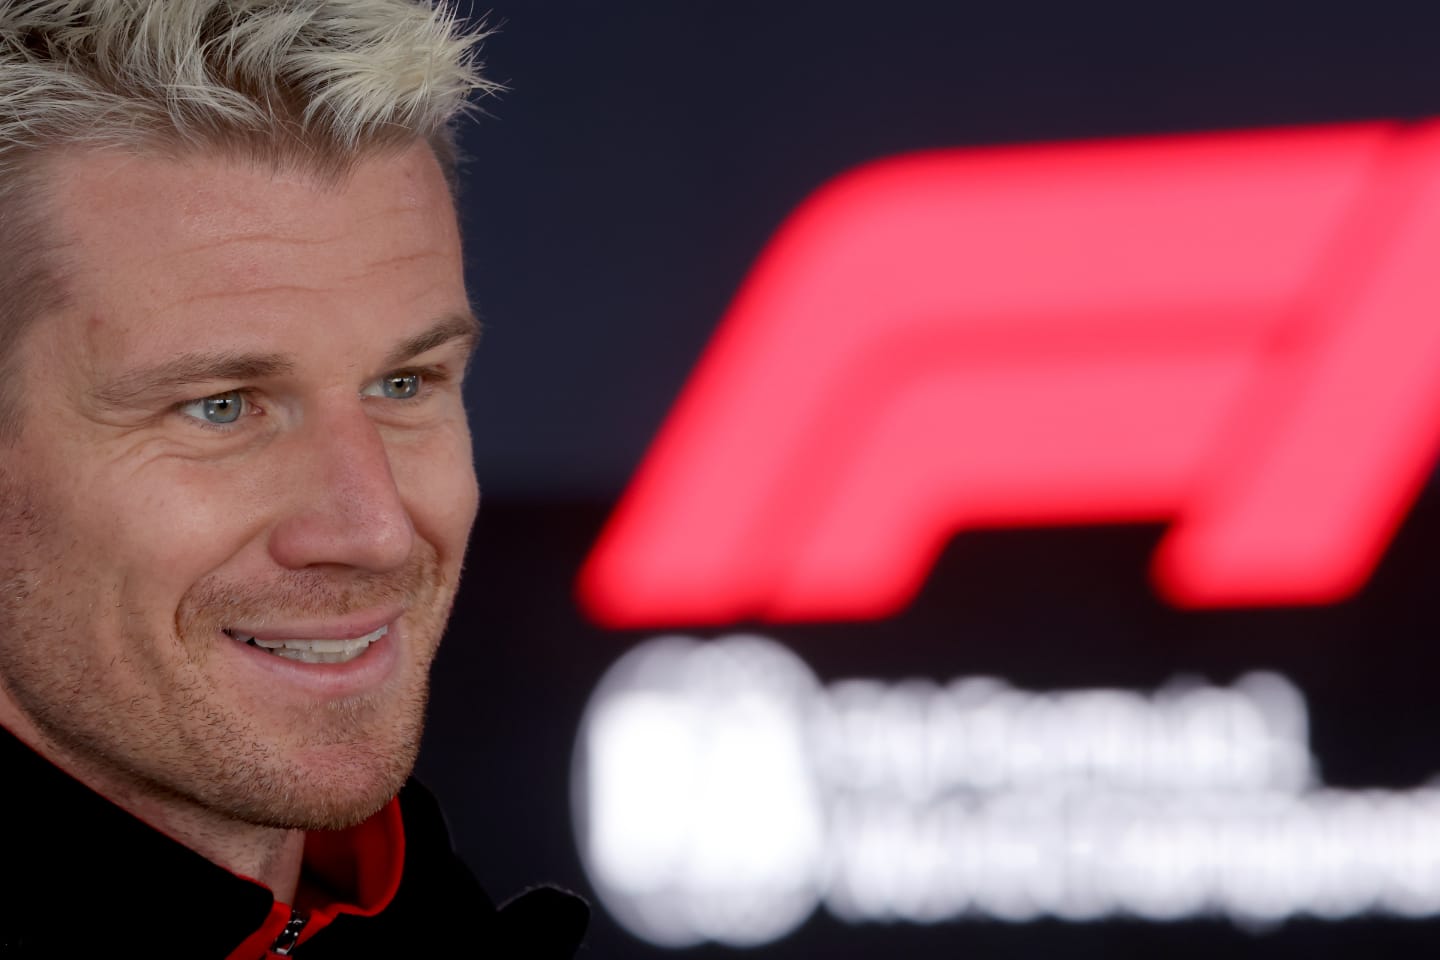 ZANDVOORT, NETHERLANDS - AUGUST 24: Nico Hulkenberg of Germany and Haas F1 talks to the media in